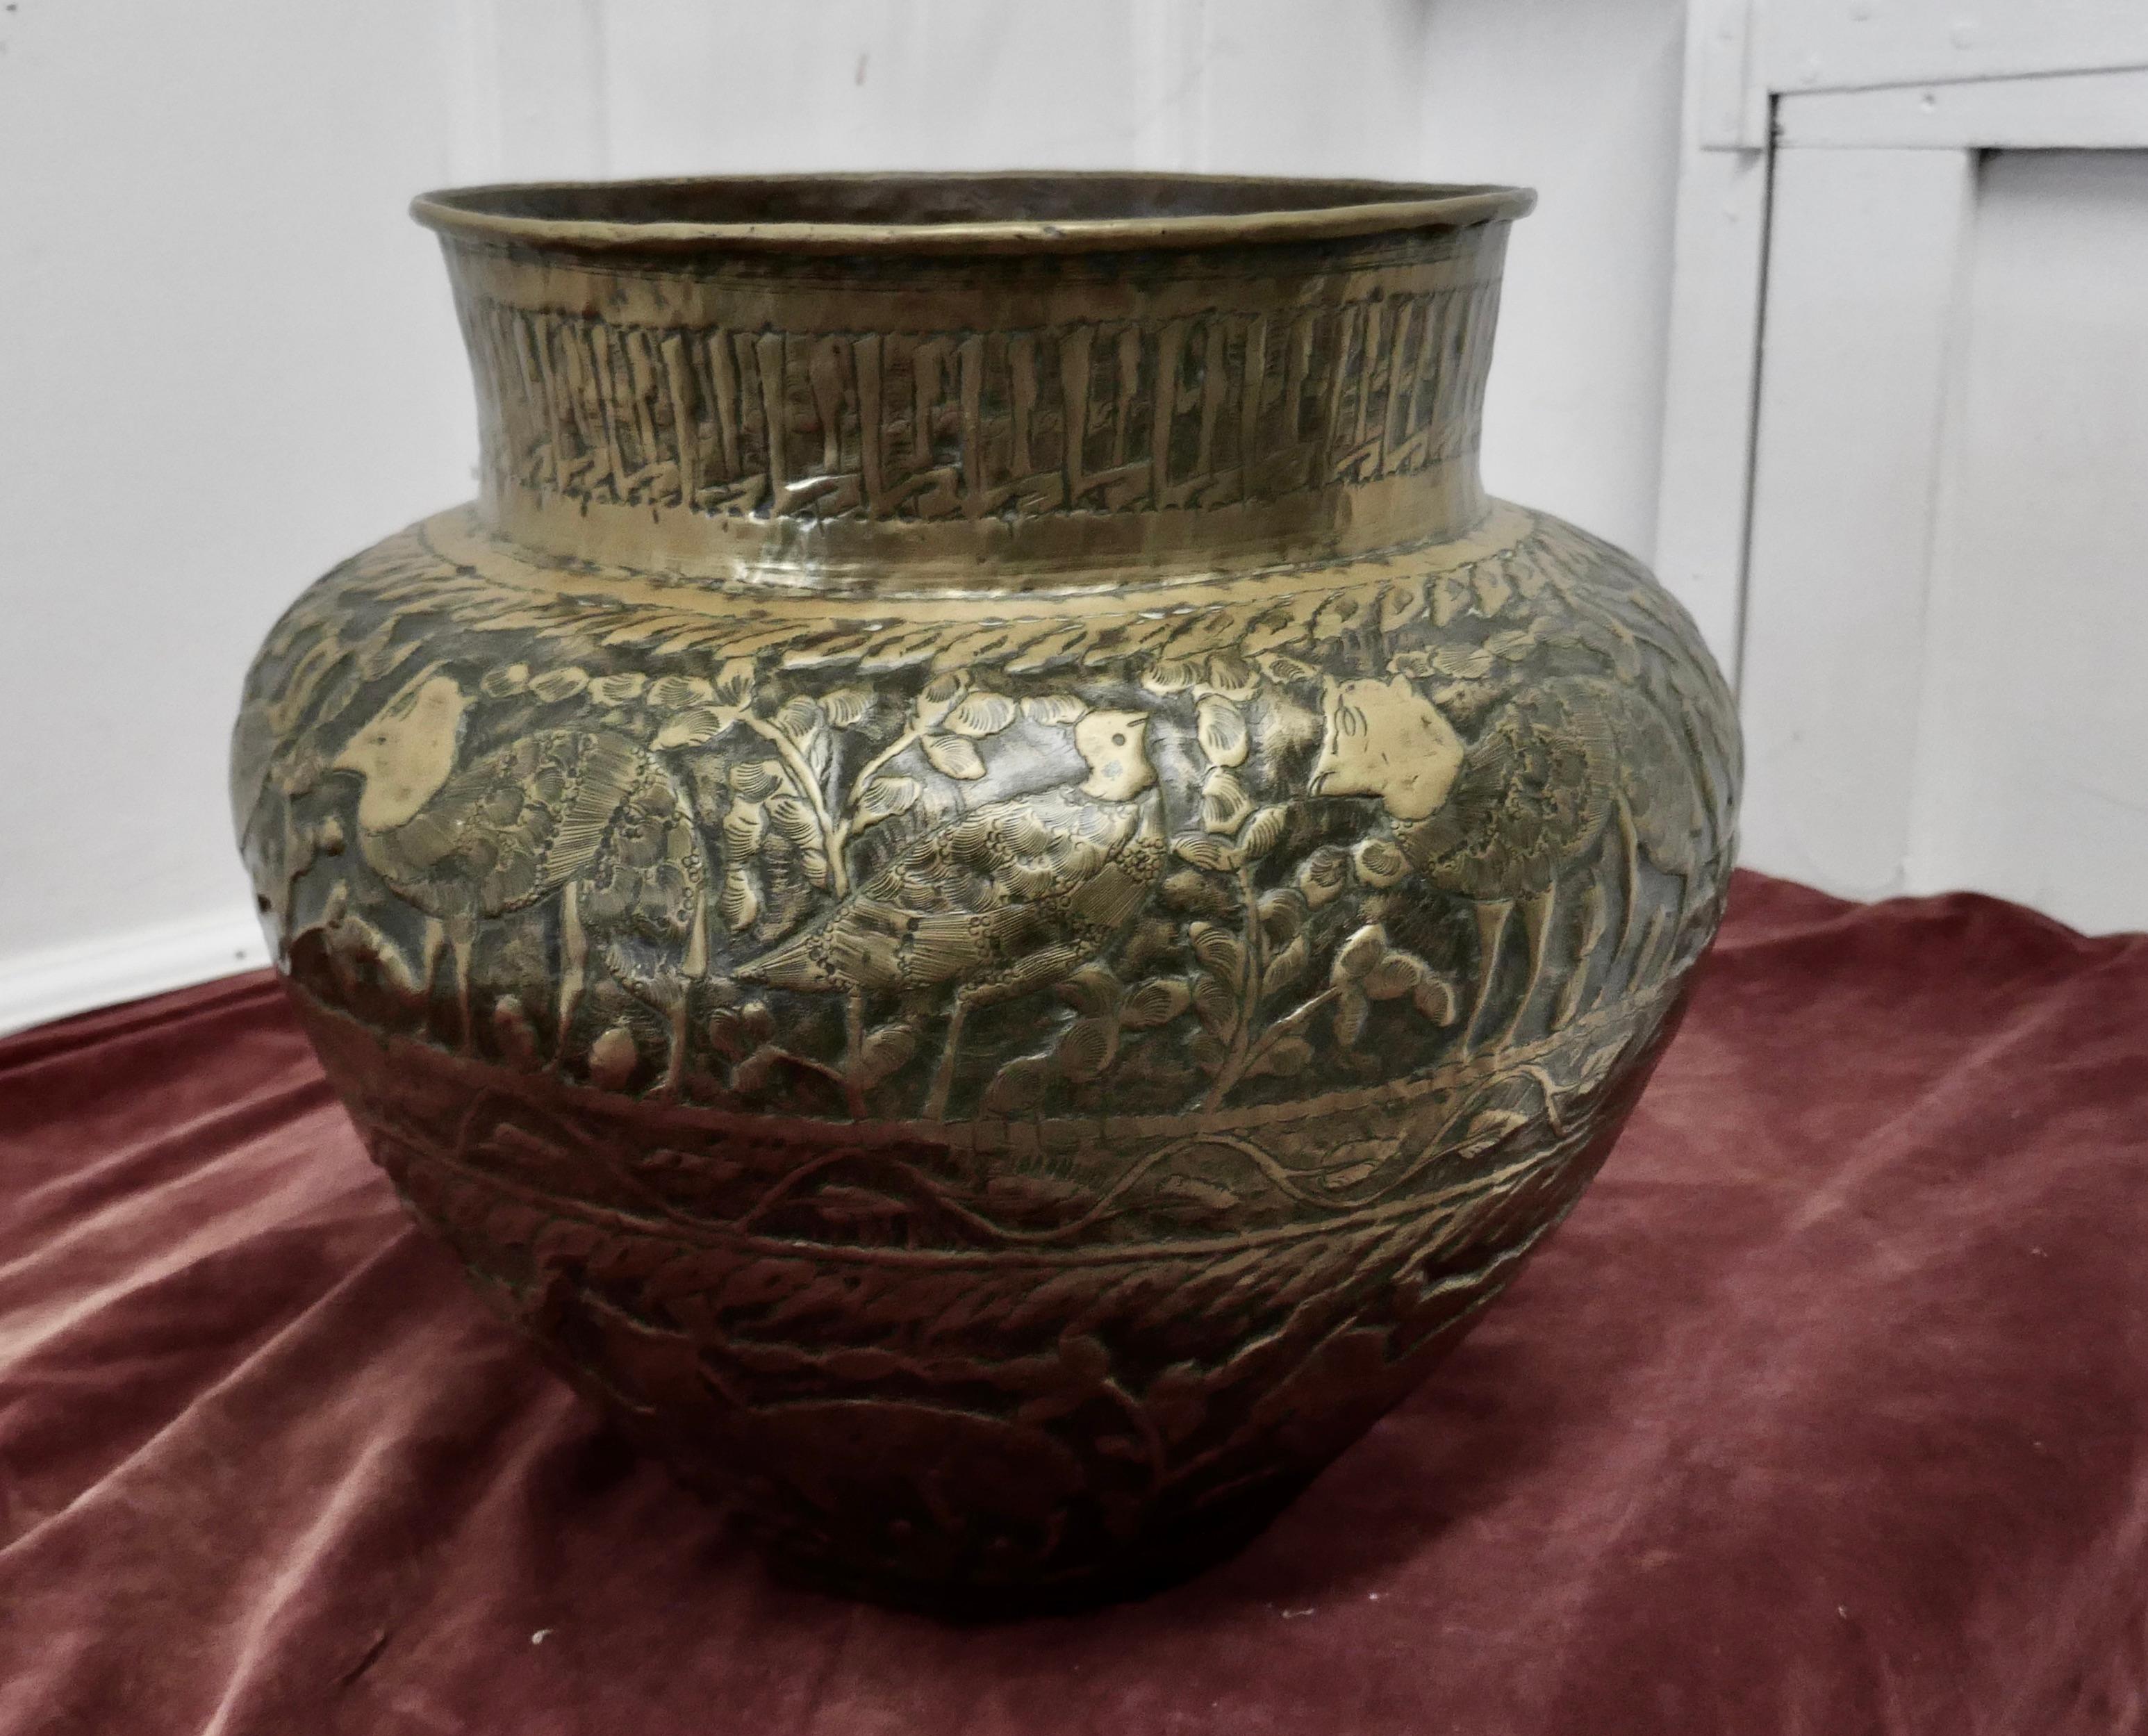 Large 19th century North African brass jardinière pot

This is a large handmade piece decorated with animals from the region and with a deep brass collar at the top of the vase
The pot is a wonderful looking piece with natural patination
In good